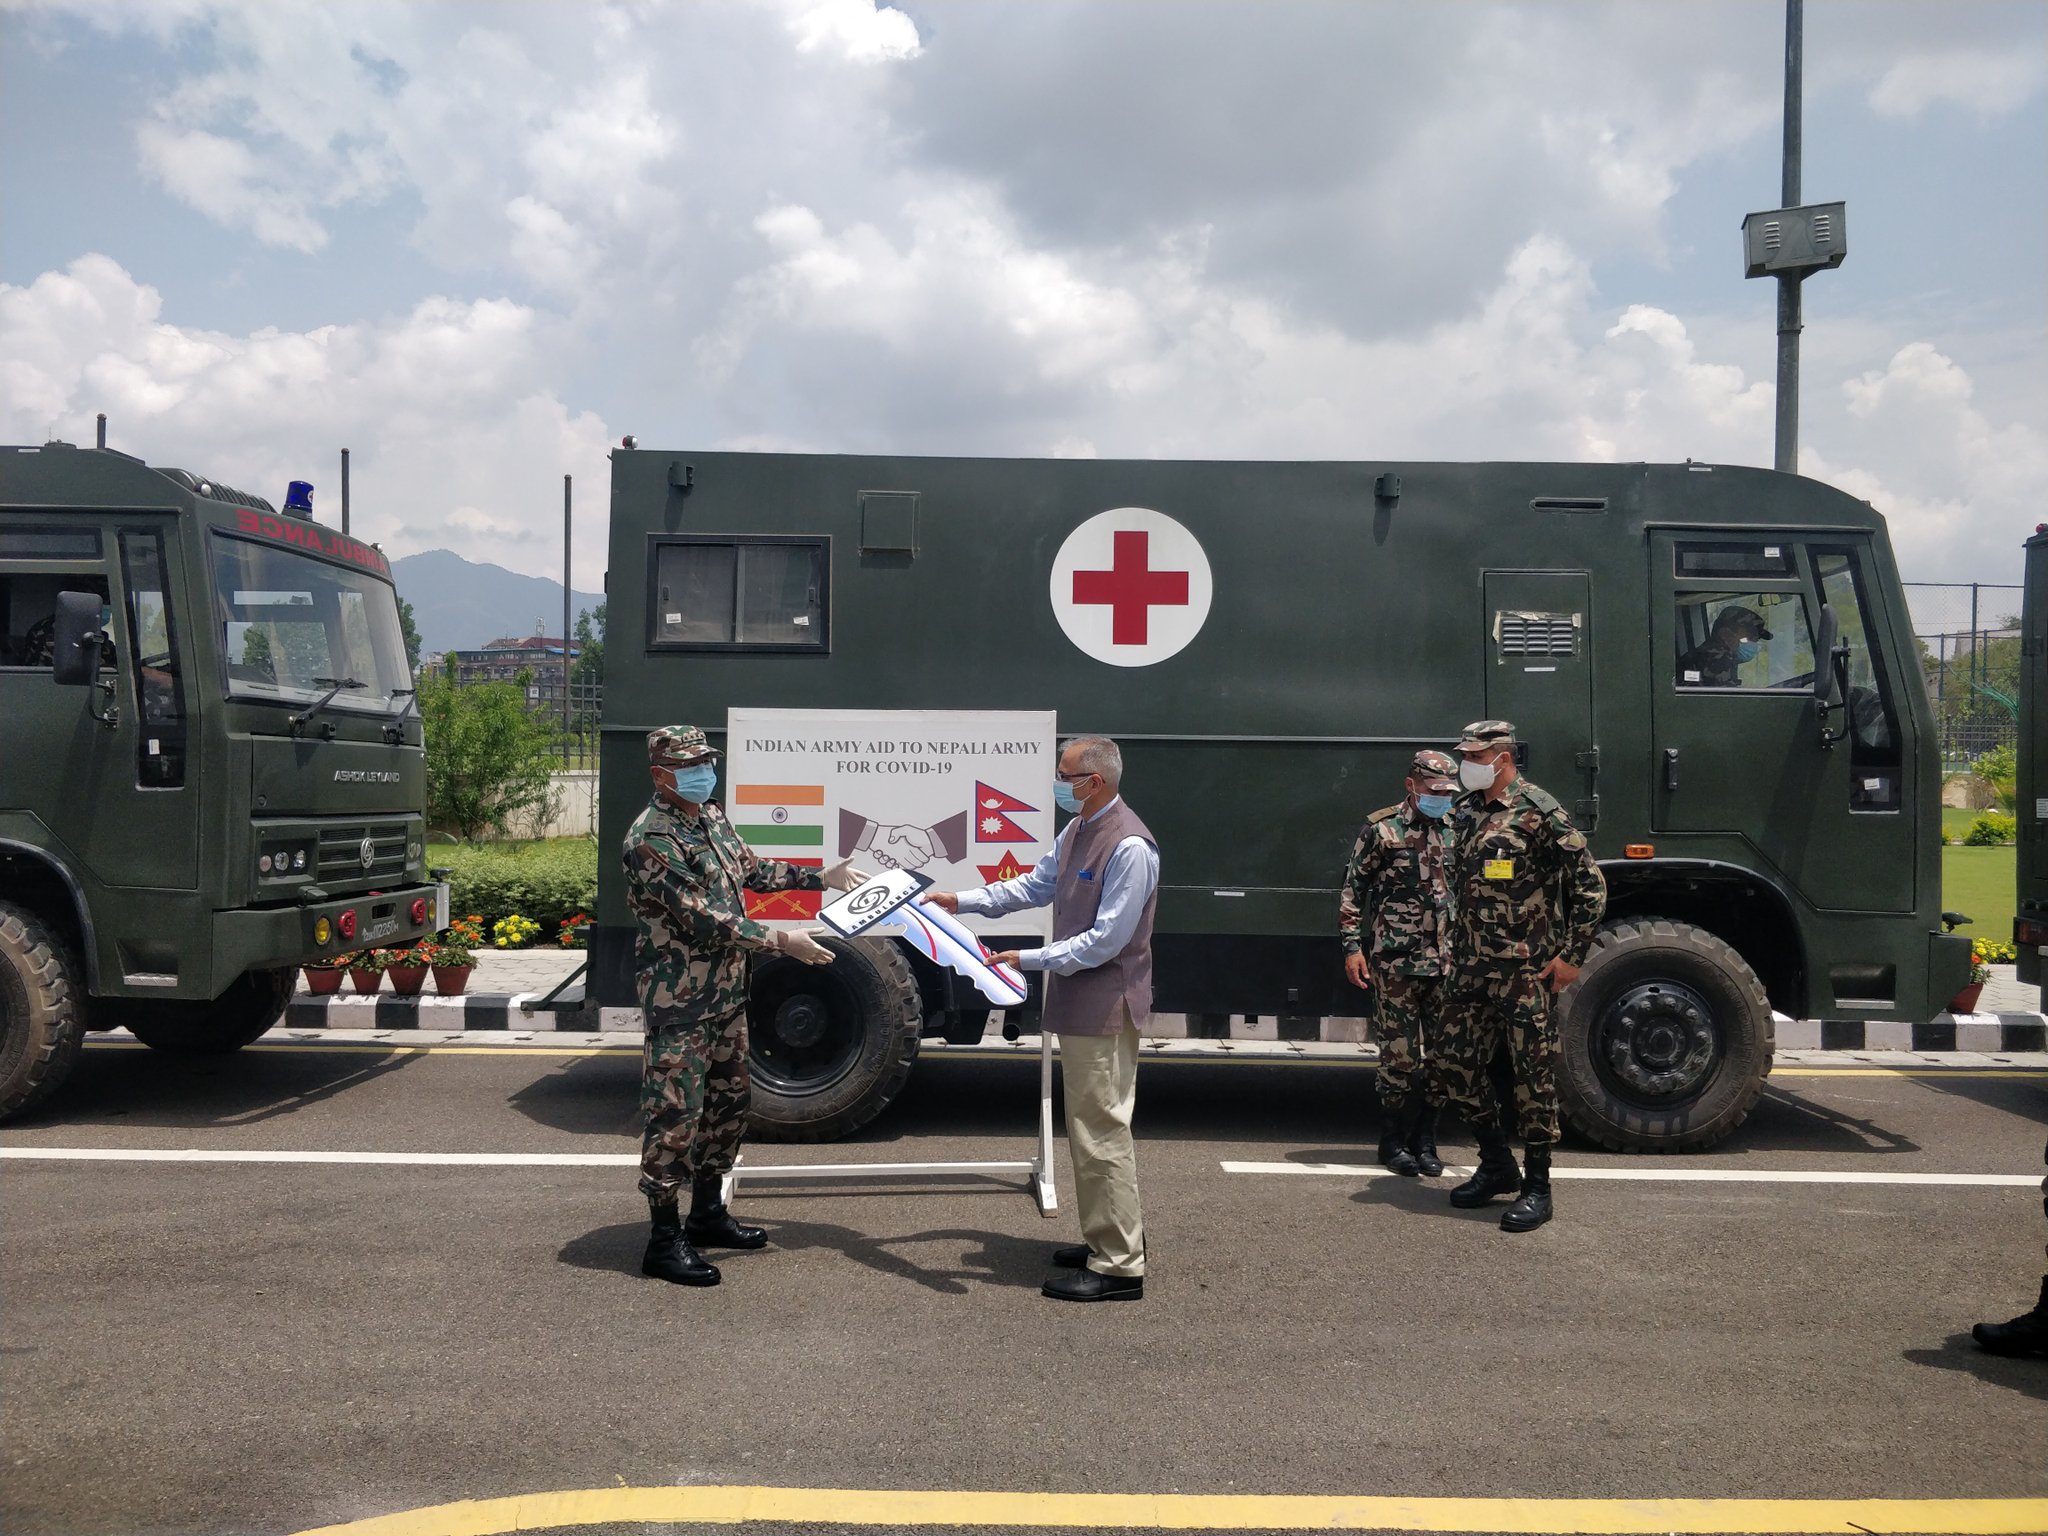 India Hands Over Medical Equipment To Nepali Army